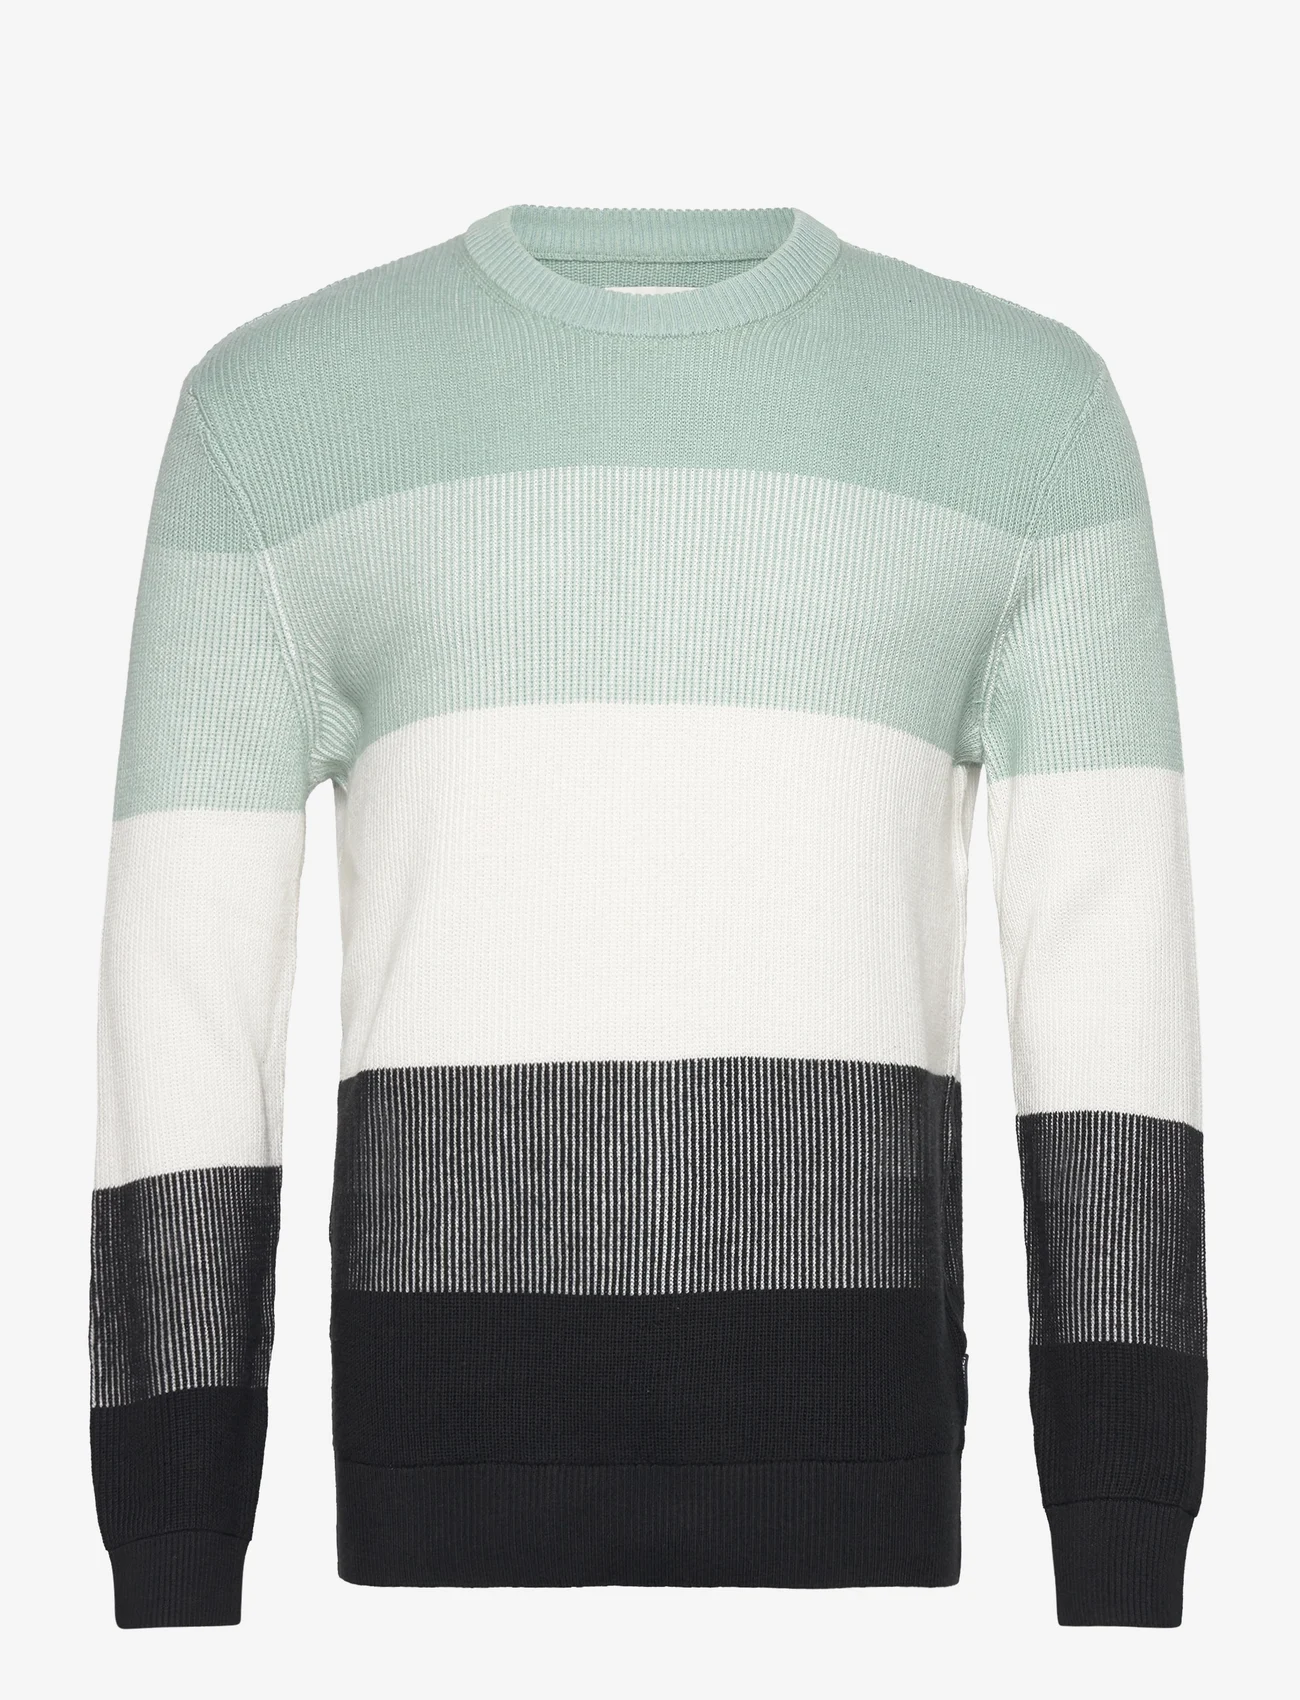 Tom Tailor - structured colorblock  knit - knitted round necks - mint white black colorblock - 0